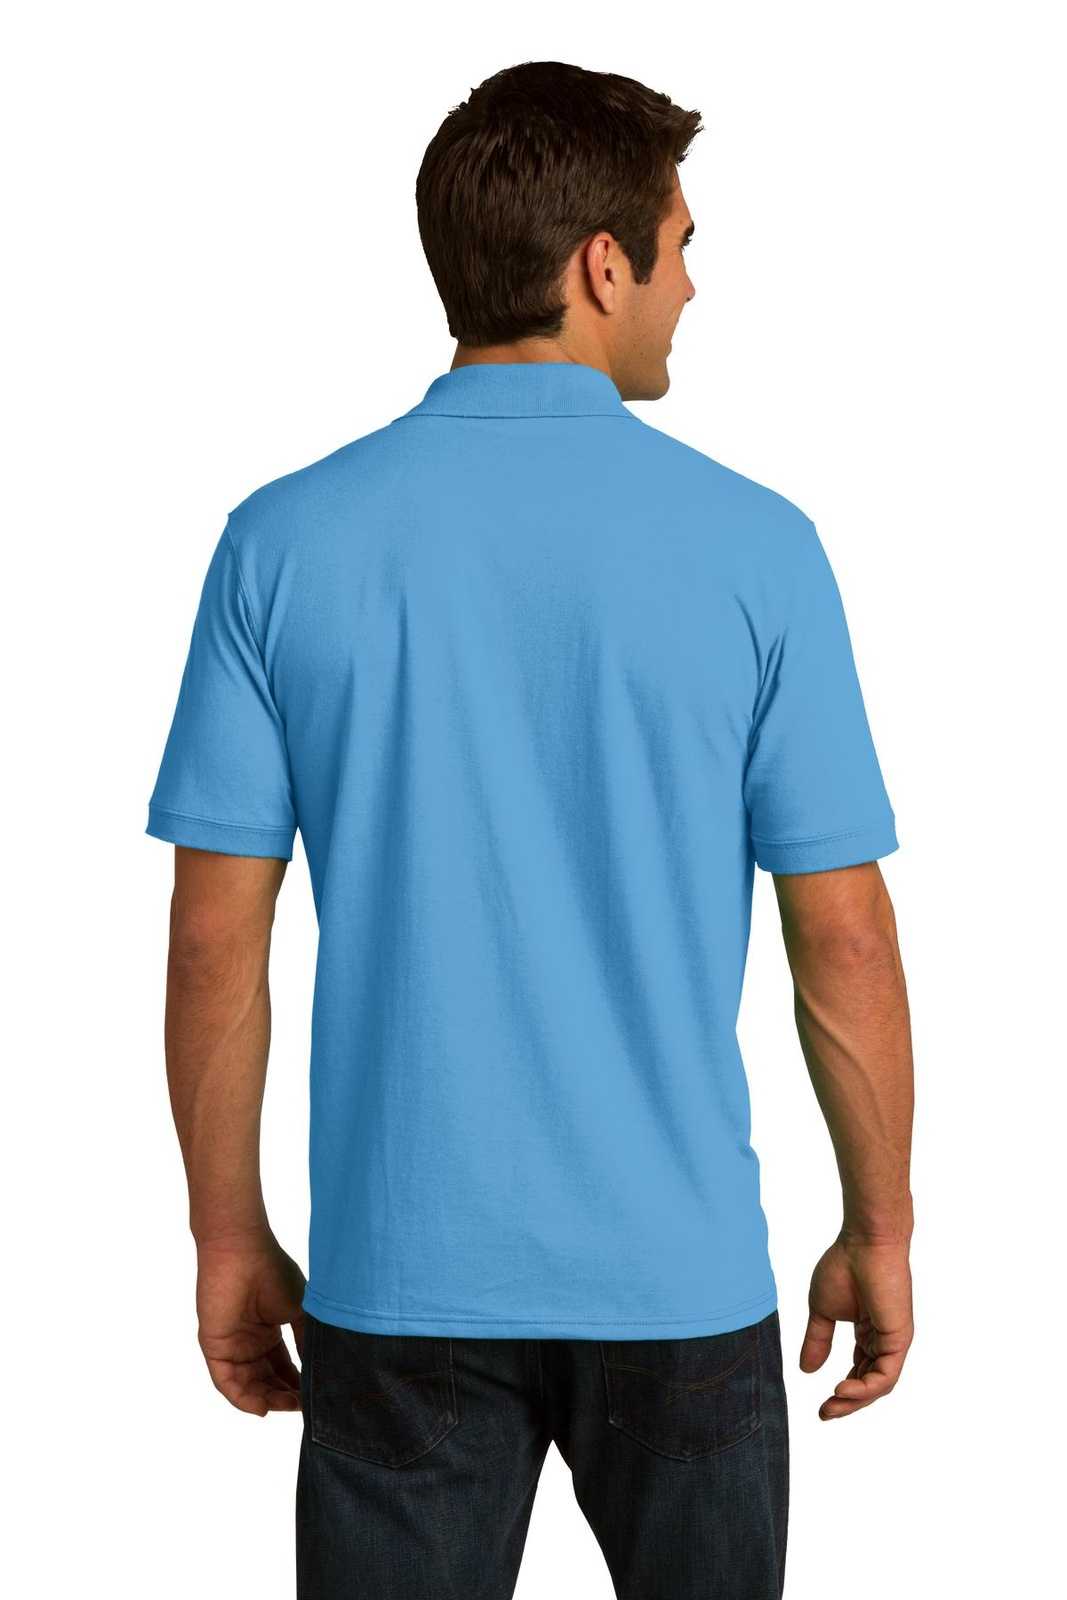 Port & Company KP55T Tall Core Blend Jersey Knit Polo - Aquatic Blue - HIT a Double - 1